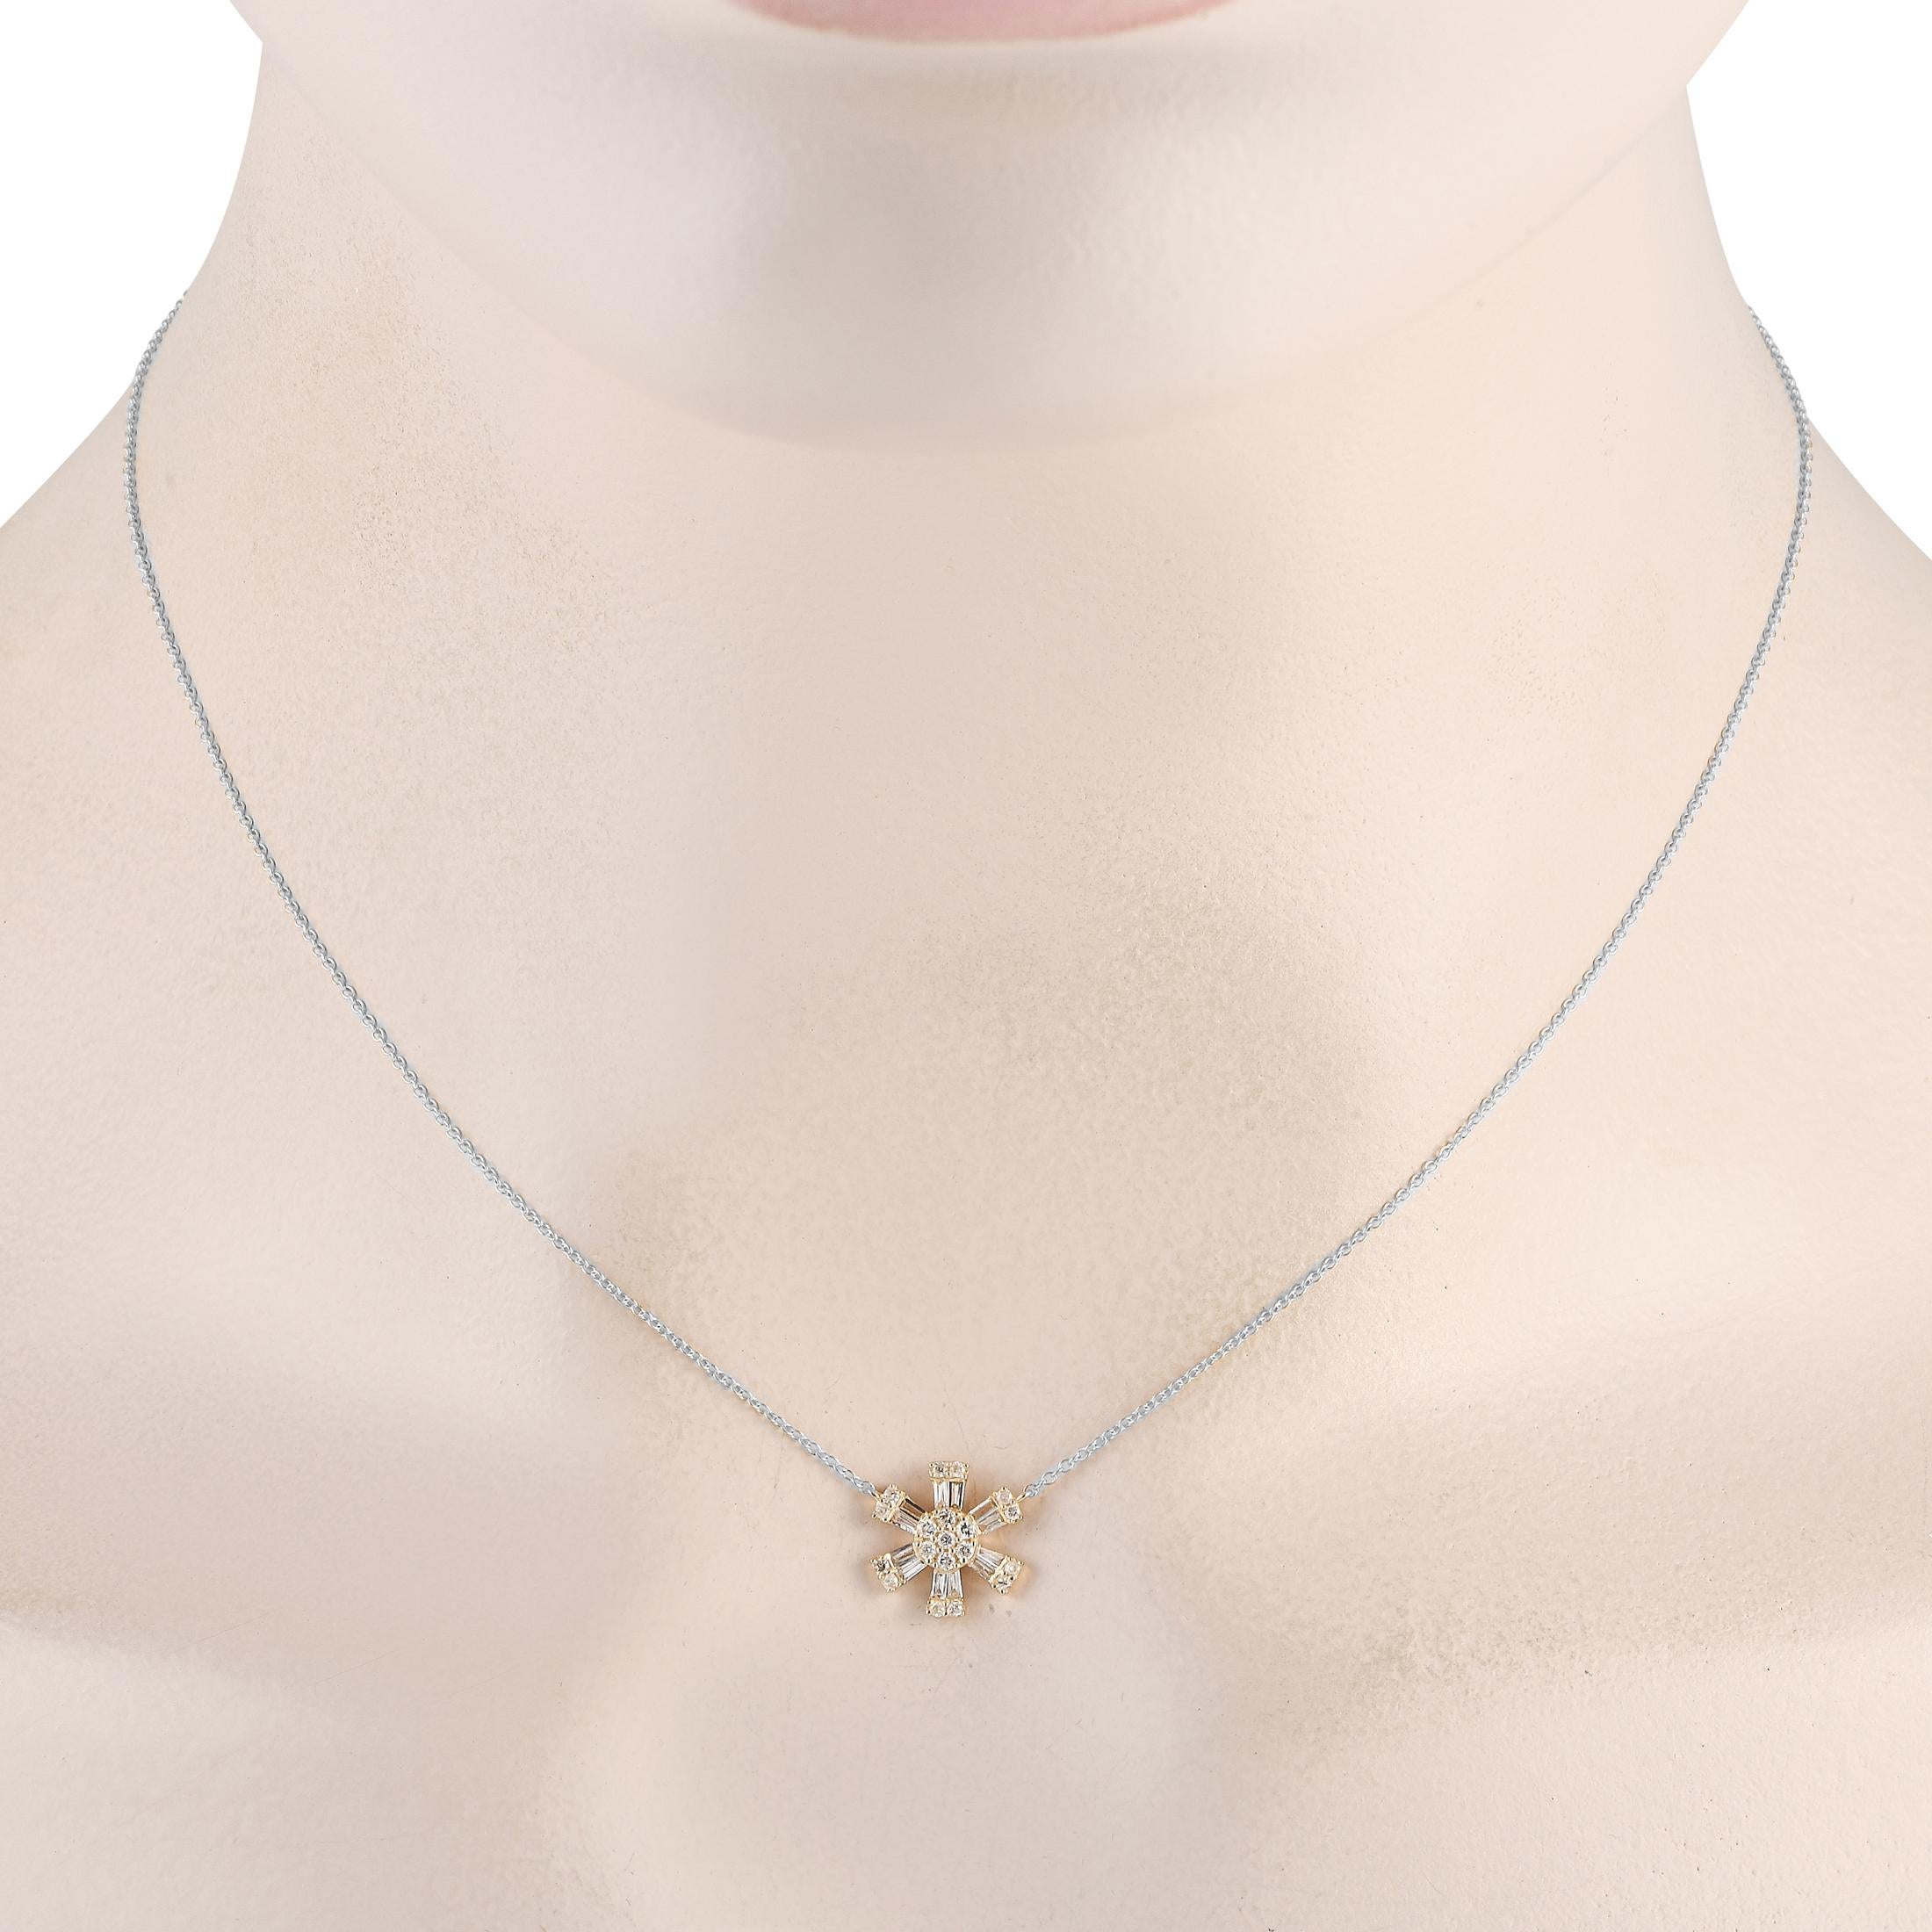 Crafted from a combination of 14K white gold and 14K yellow gold, this effortless necklace is an impressive piece that is ideal for everyday wear. Suspended at the center of a 15.5” chain, you’ll find a breathtaking pendant that measures 0.50” round